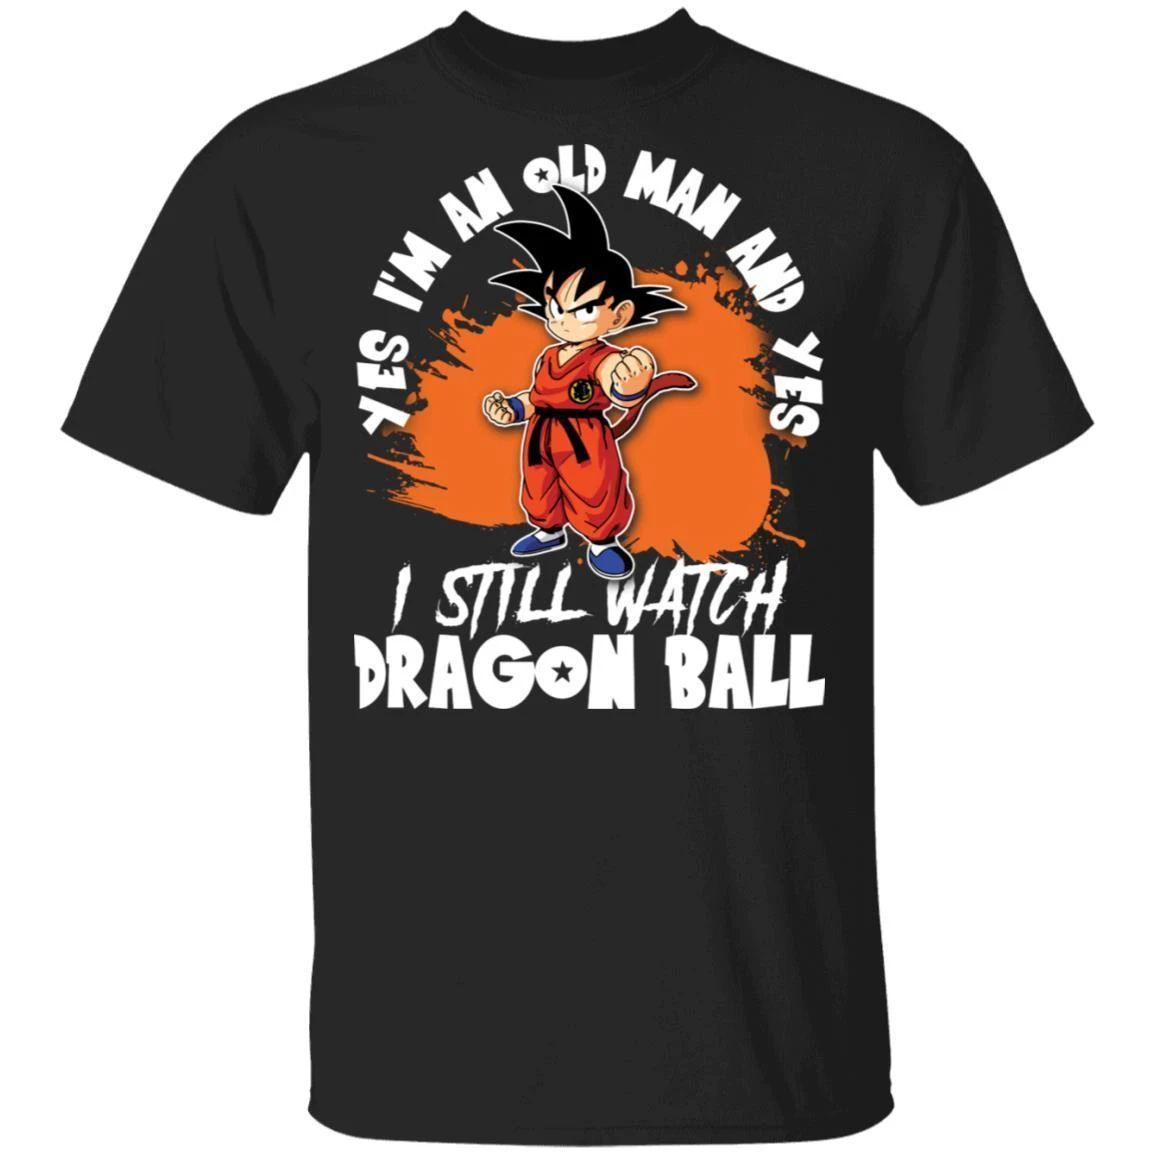 Yes I’m An Old Man And Yes I Still Watch Dragon Ball Shirt Son Goku Tee